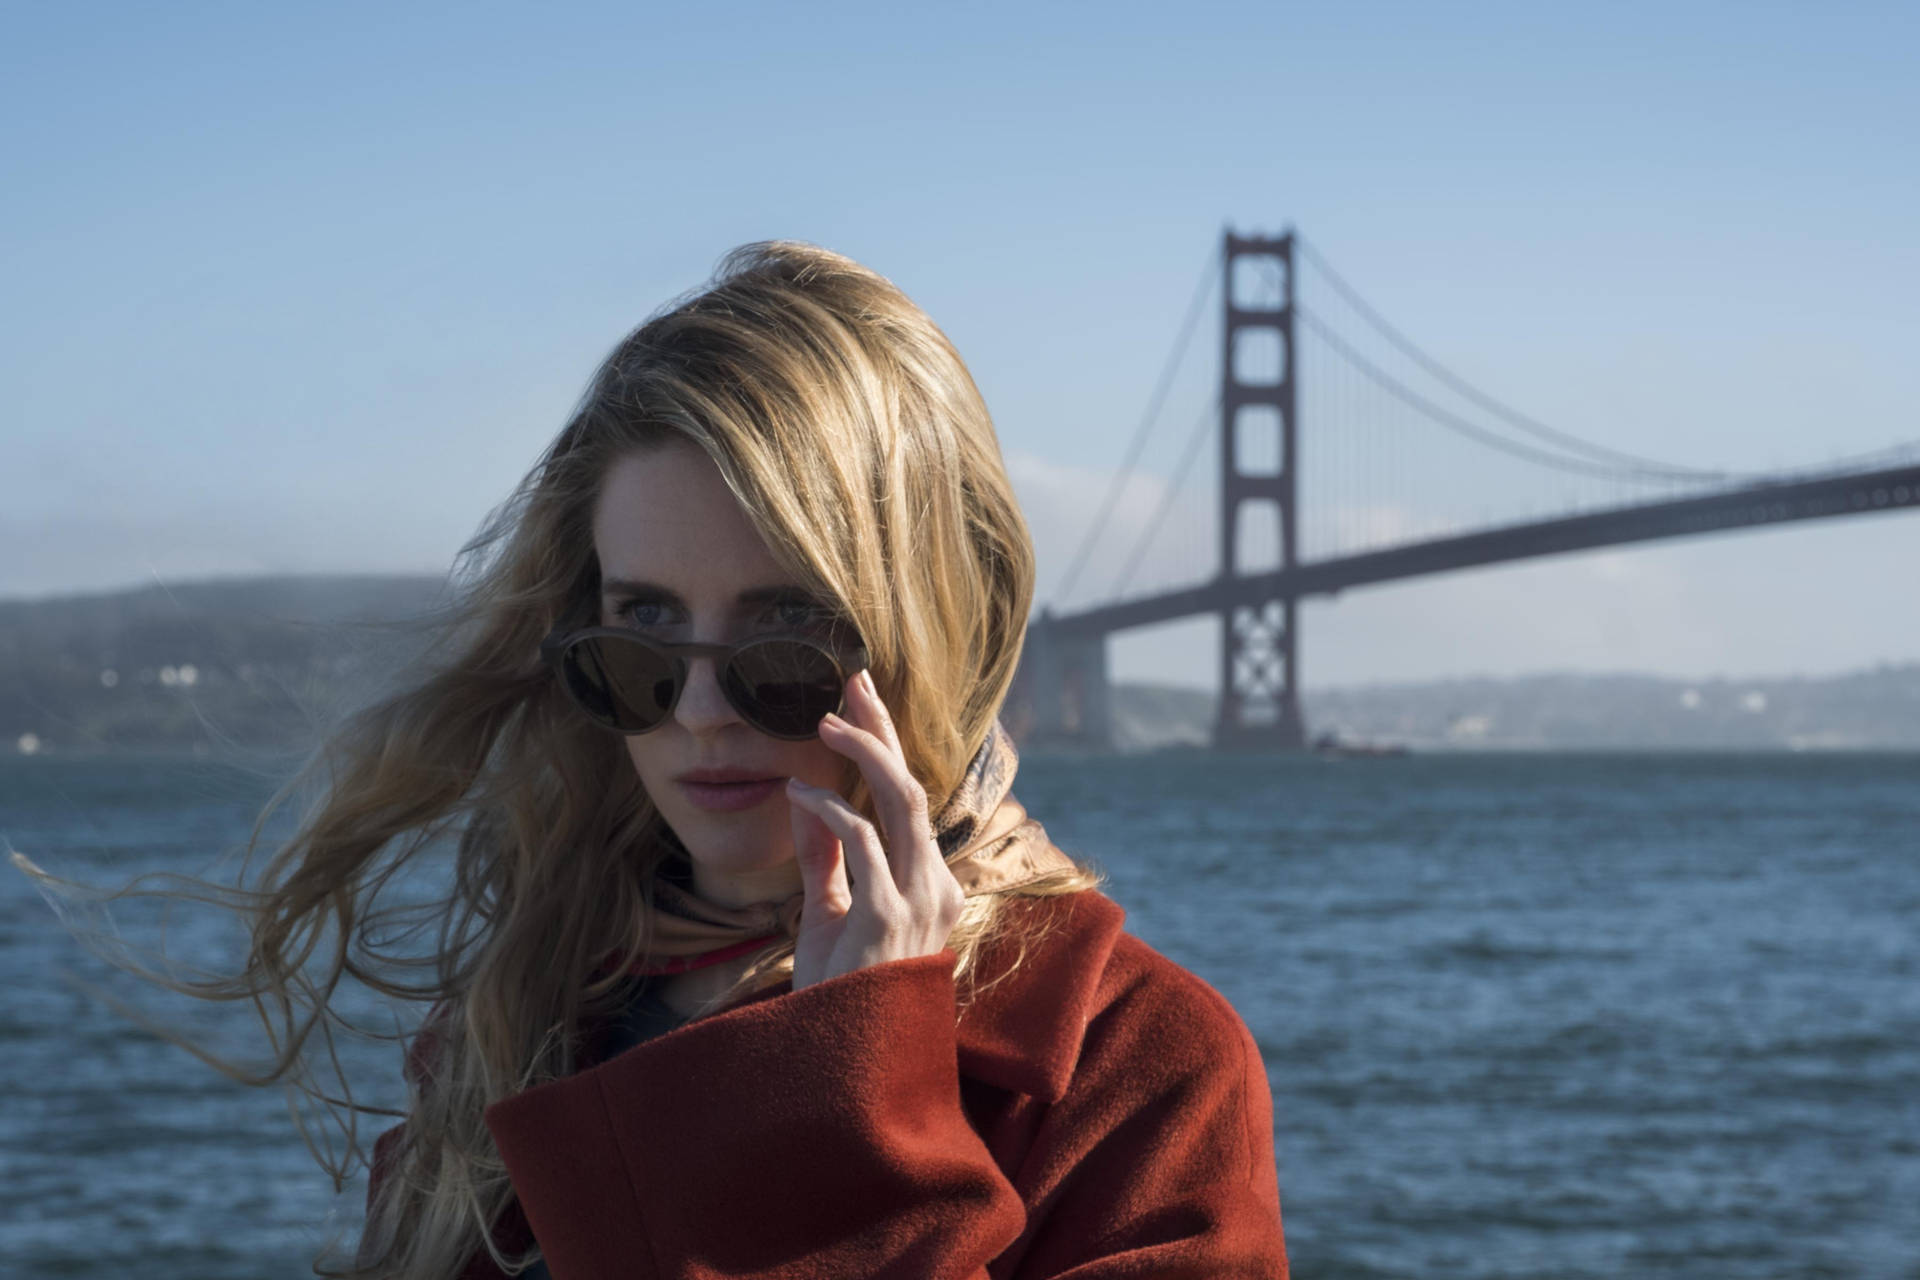 Prairie Johnson Of The Oa With Sunglasses Wallpaper